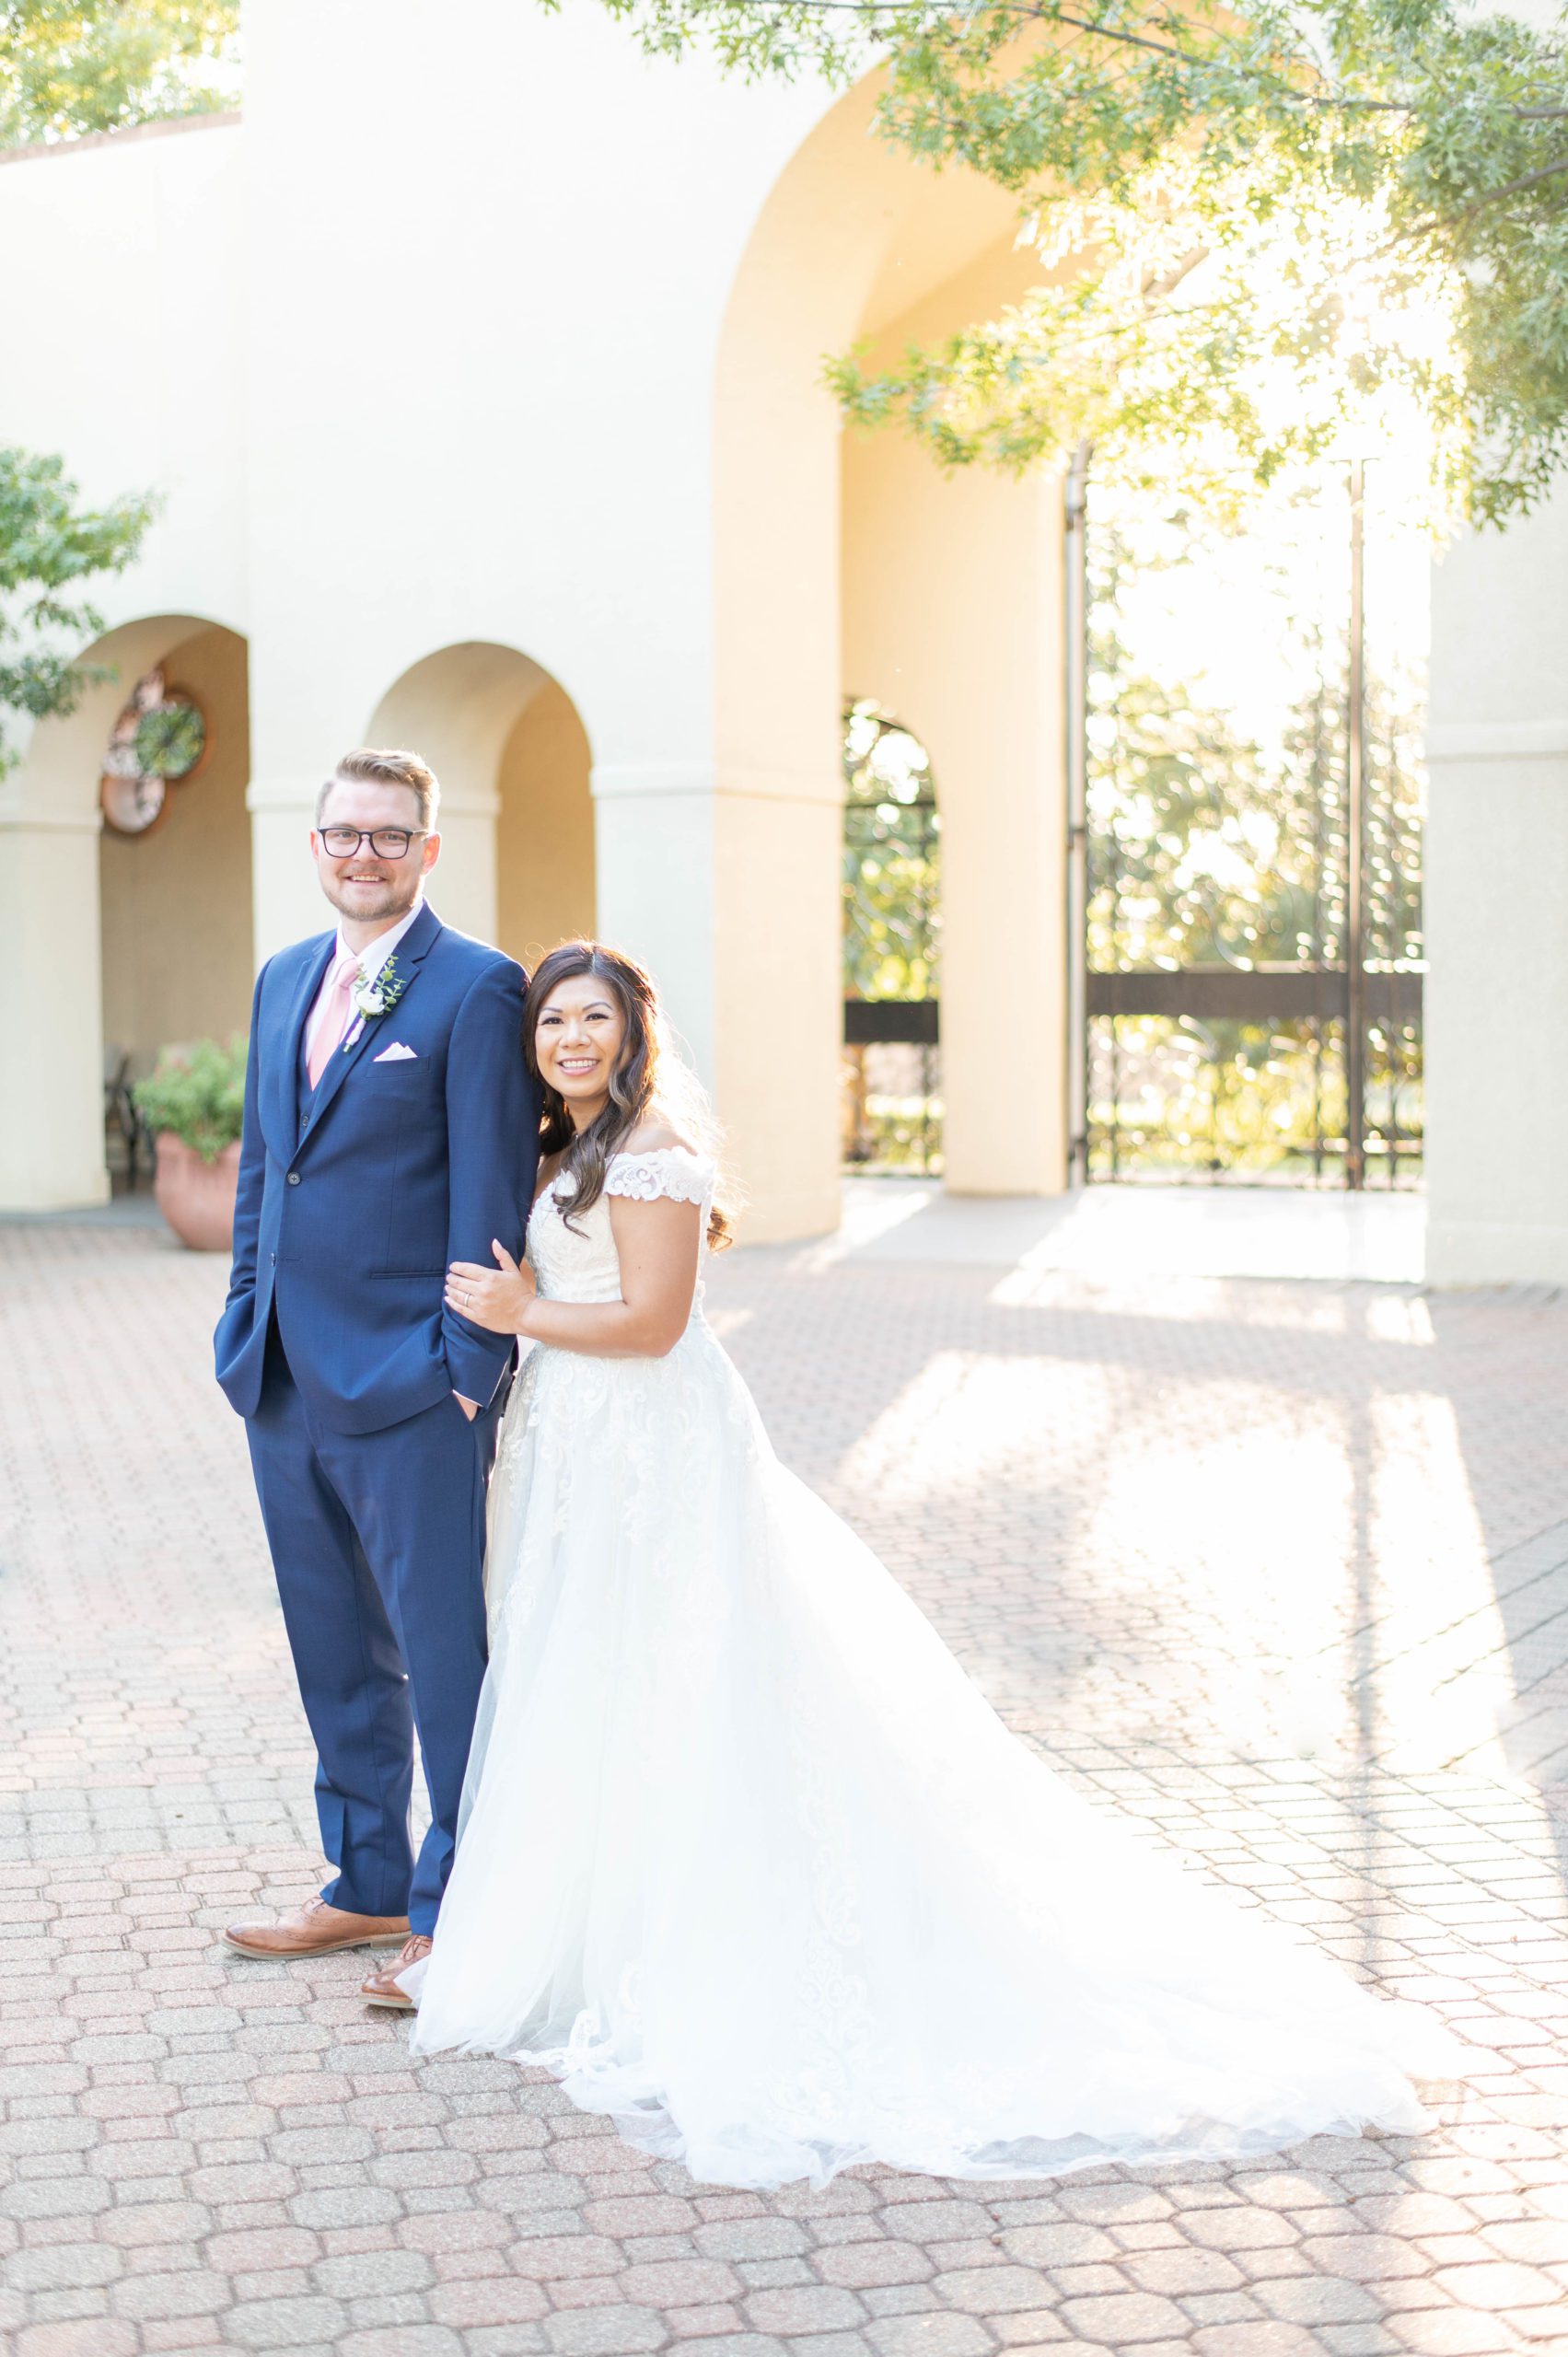 bride and groom smile at camera in a beautifully lit church courtyard at their modern romantic wedding